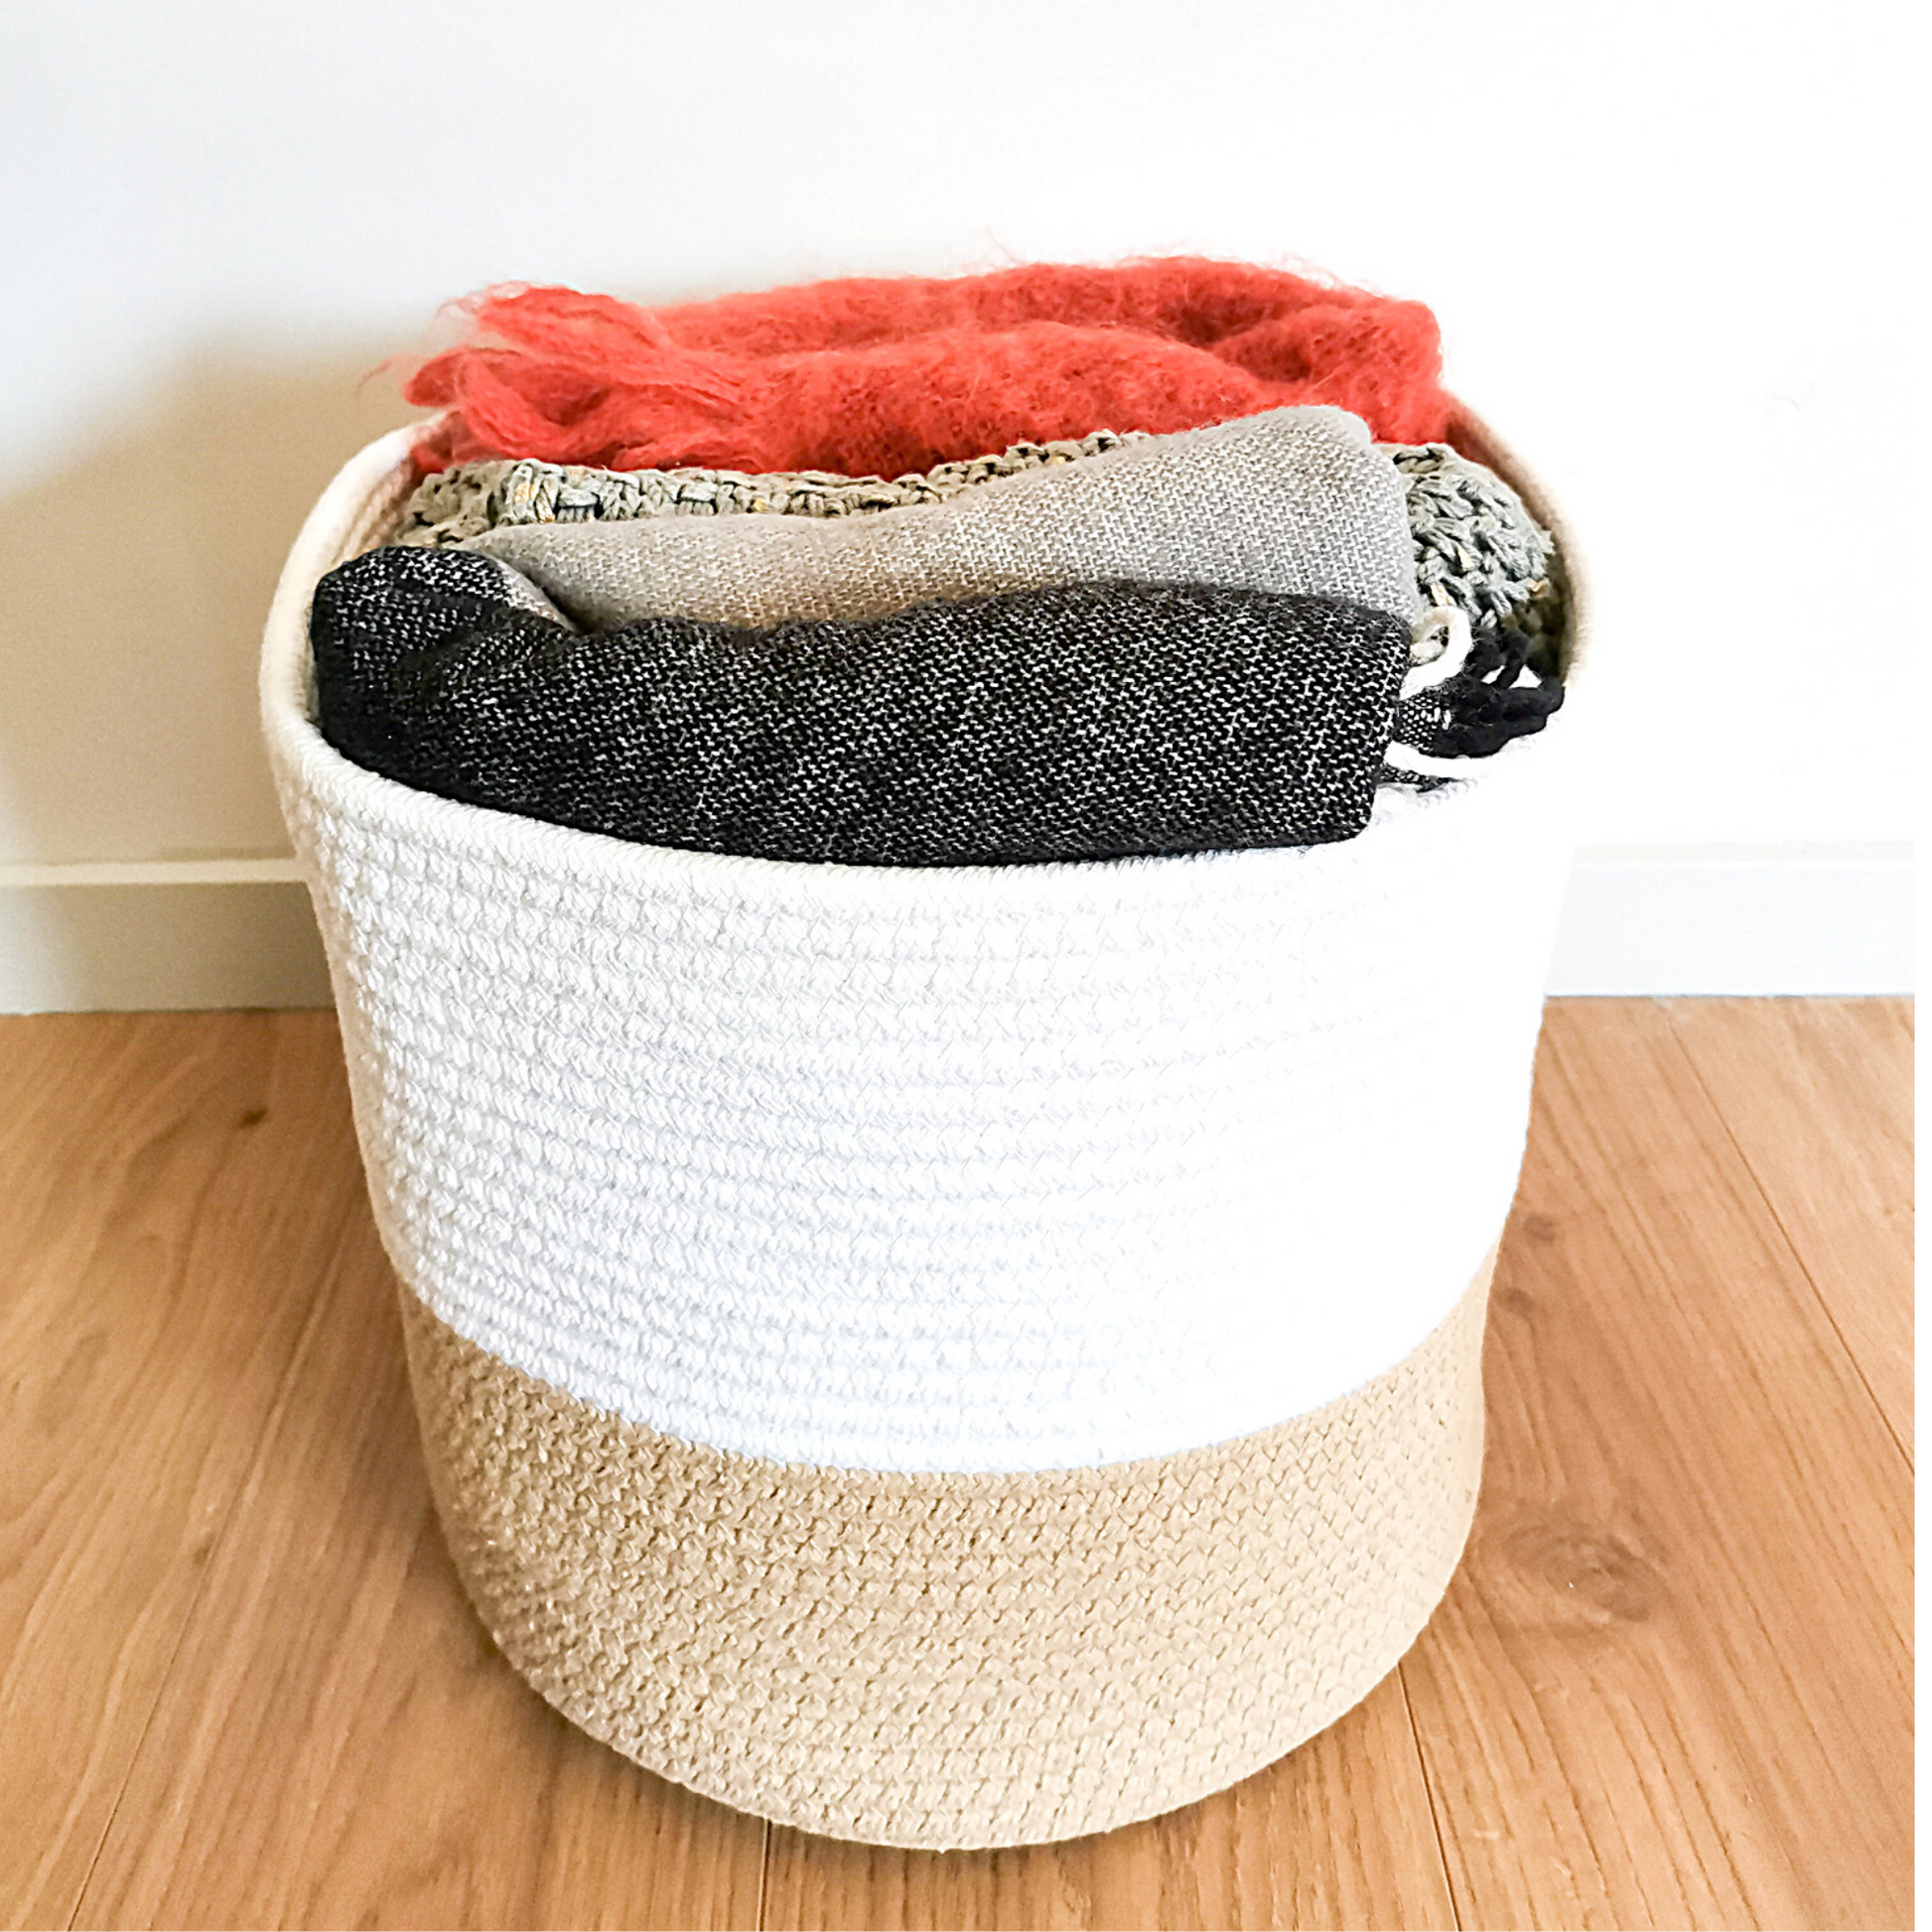 Beautiful decorative woven cotton baskets for storing laundry, blankets, pillowcases, rugs. Use it as a storage basket for the house or indoor plant holder.